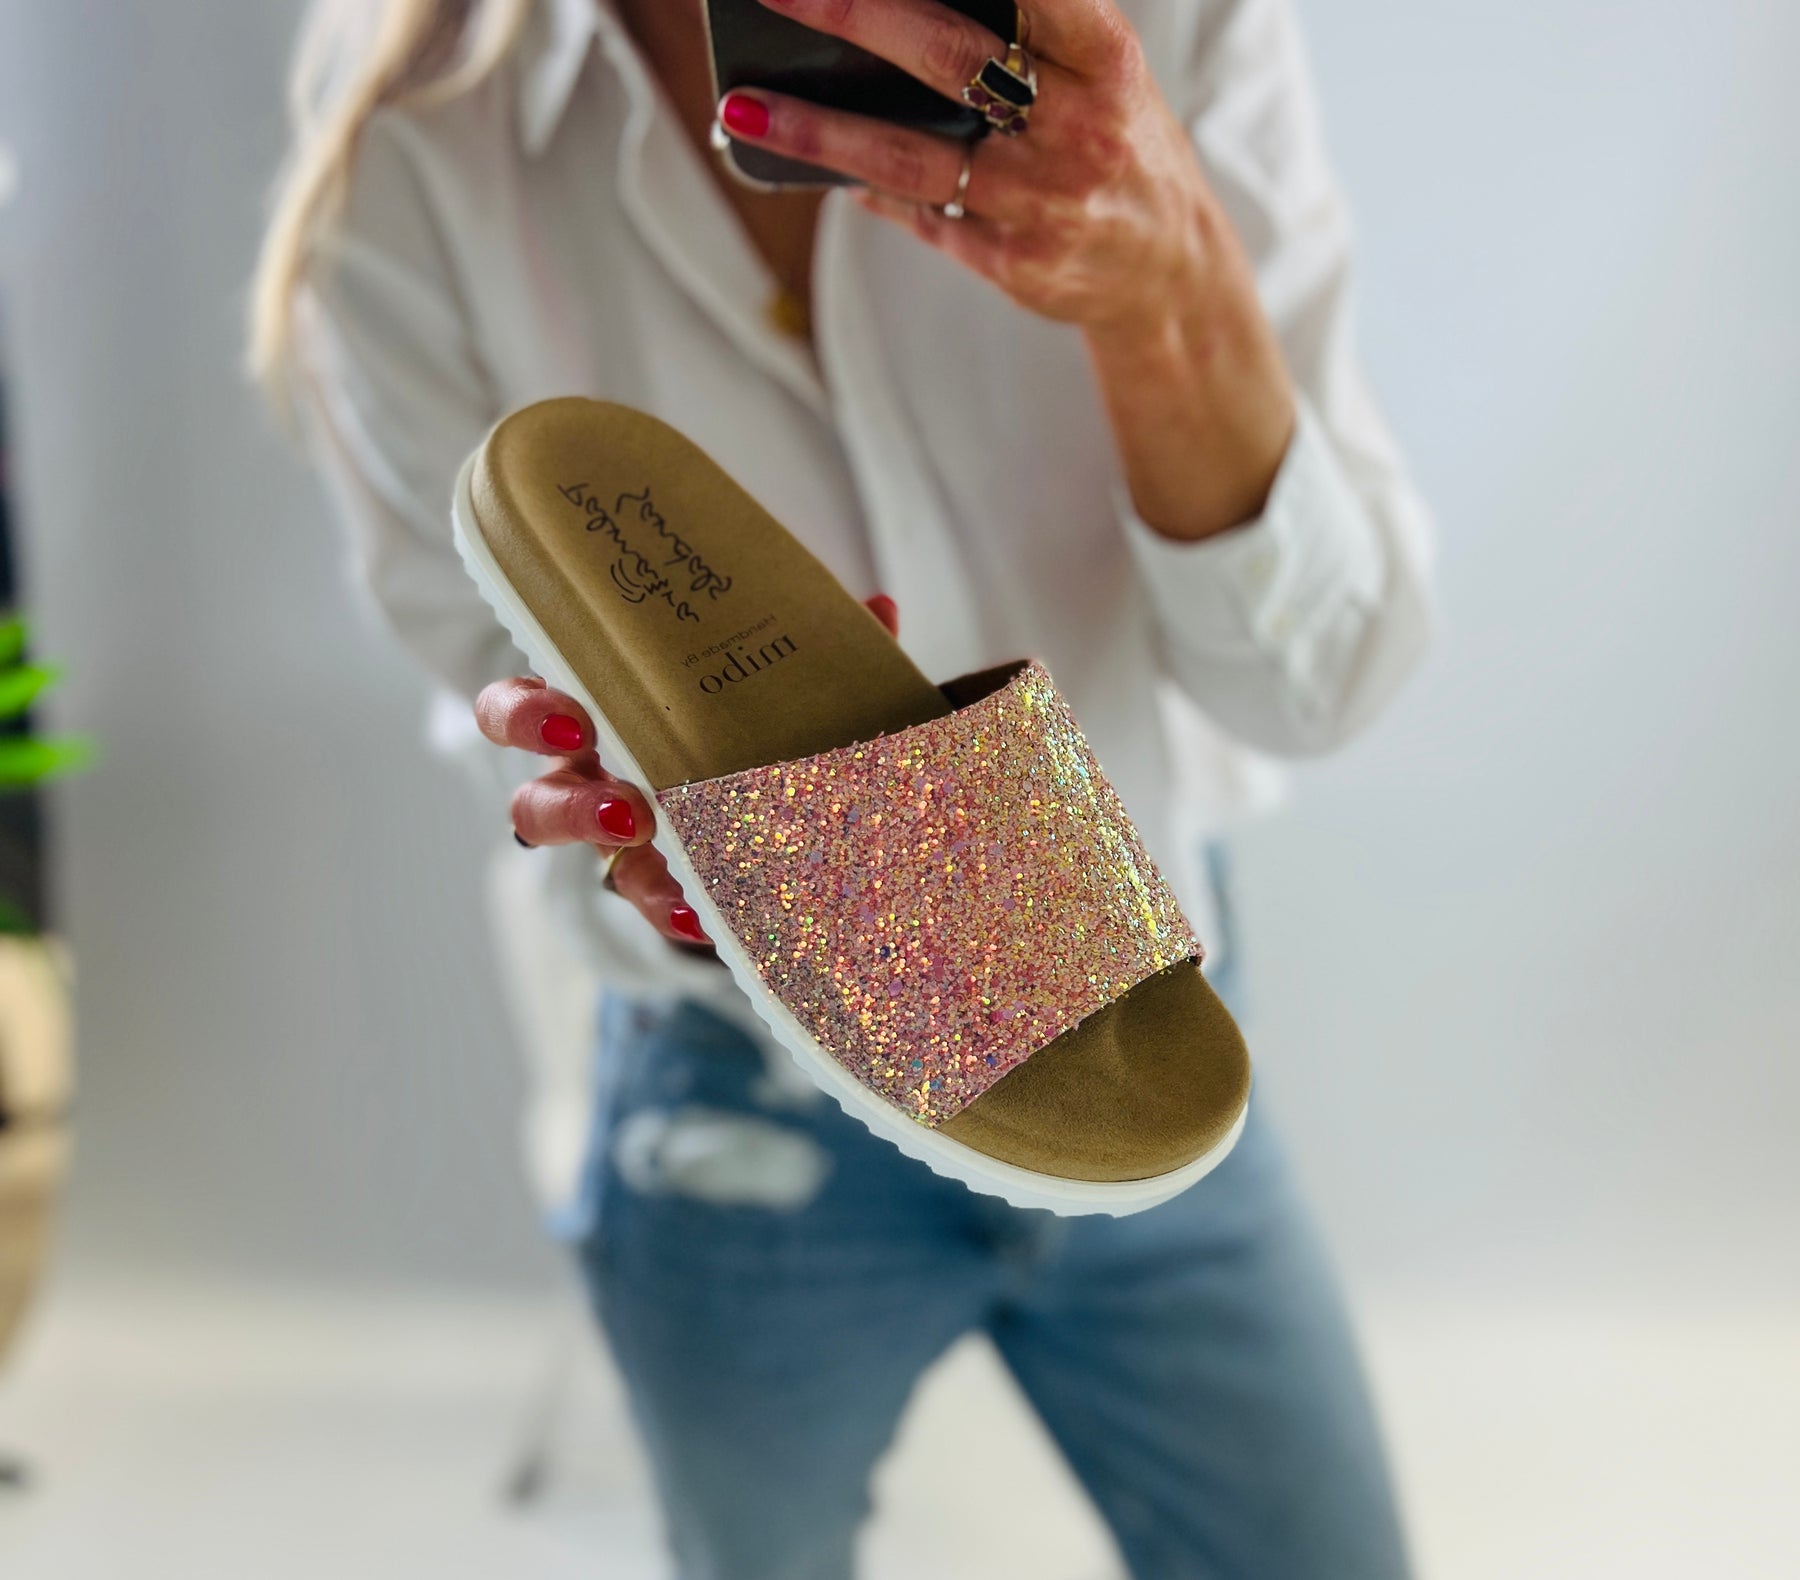 Slip on, peachy pink sparkly sliders with an ergonomic microsuede innersole